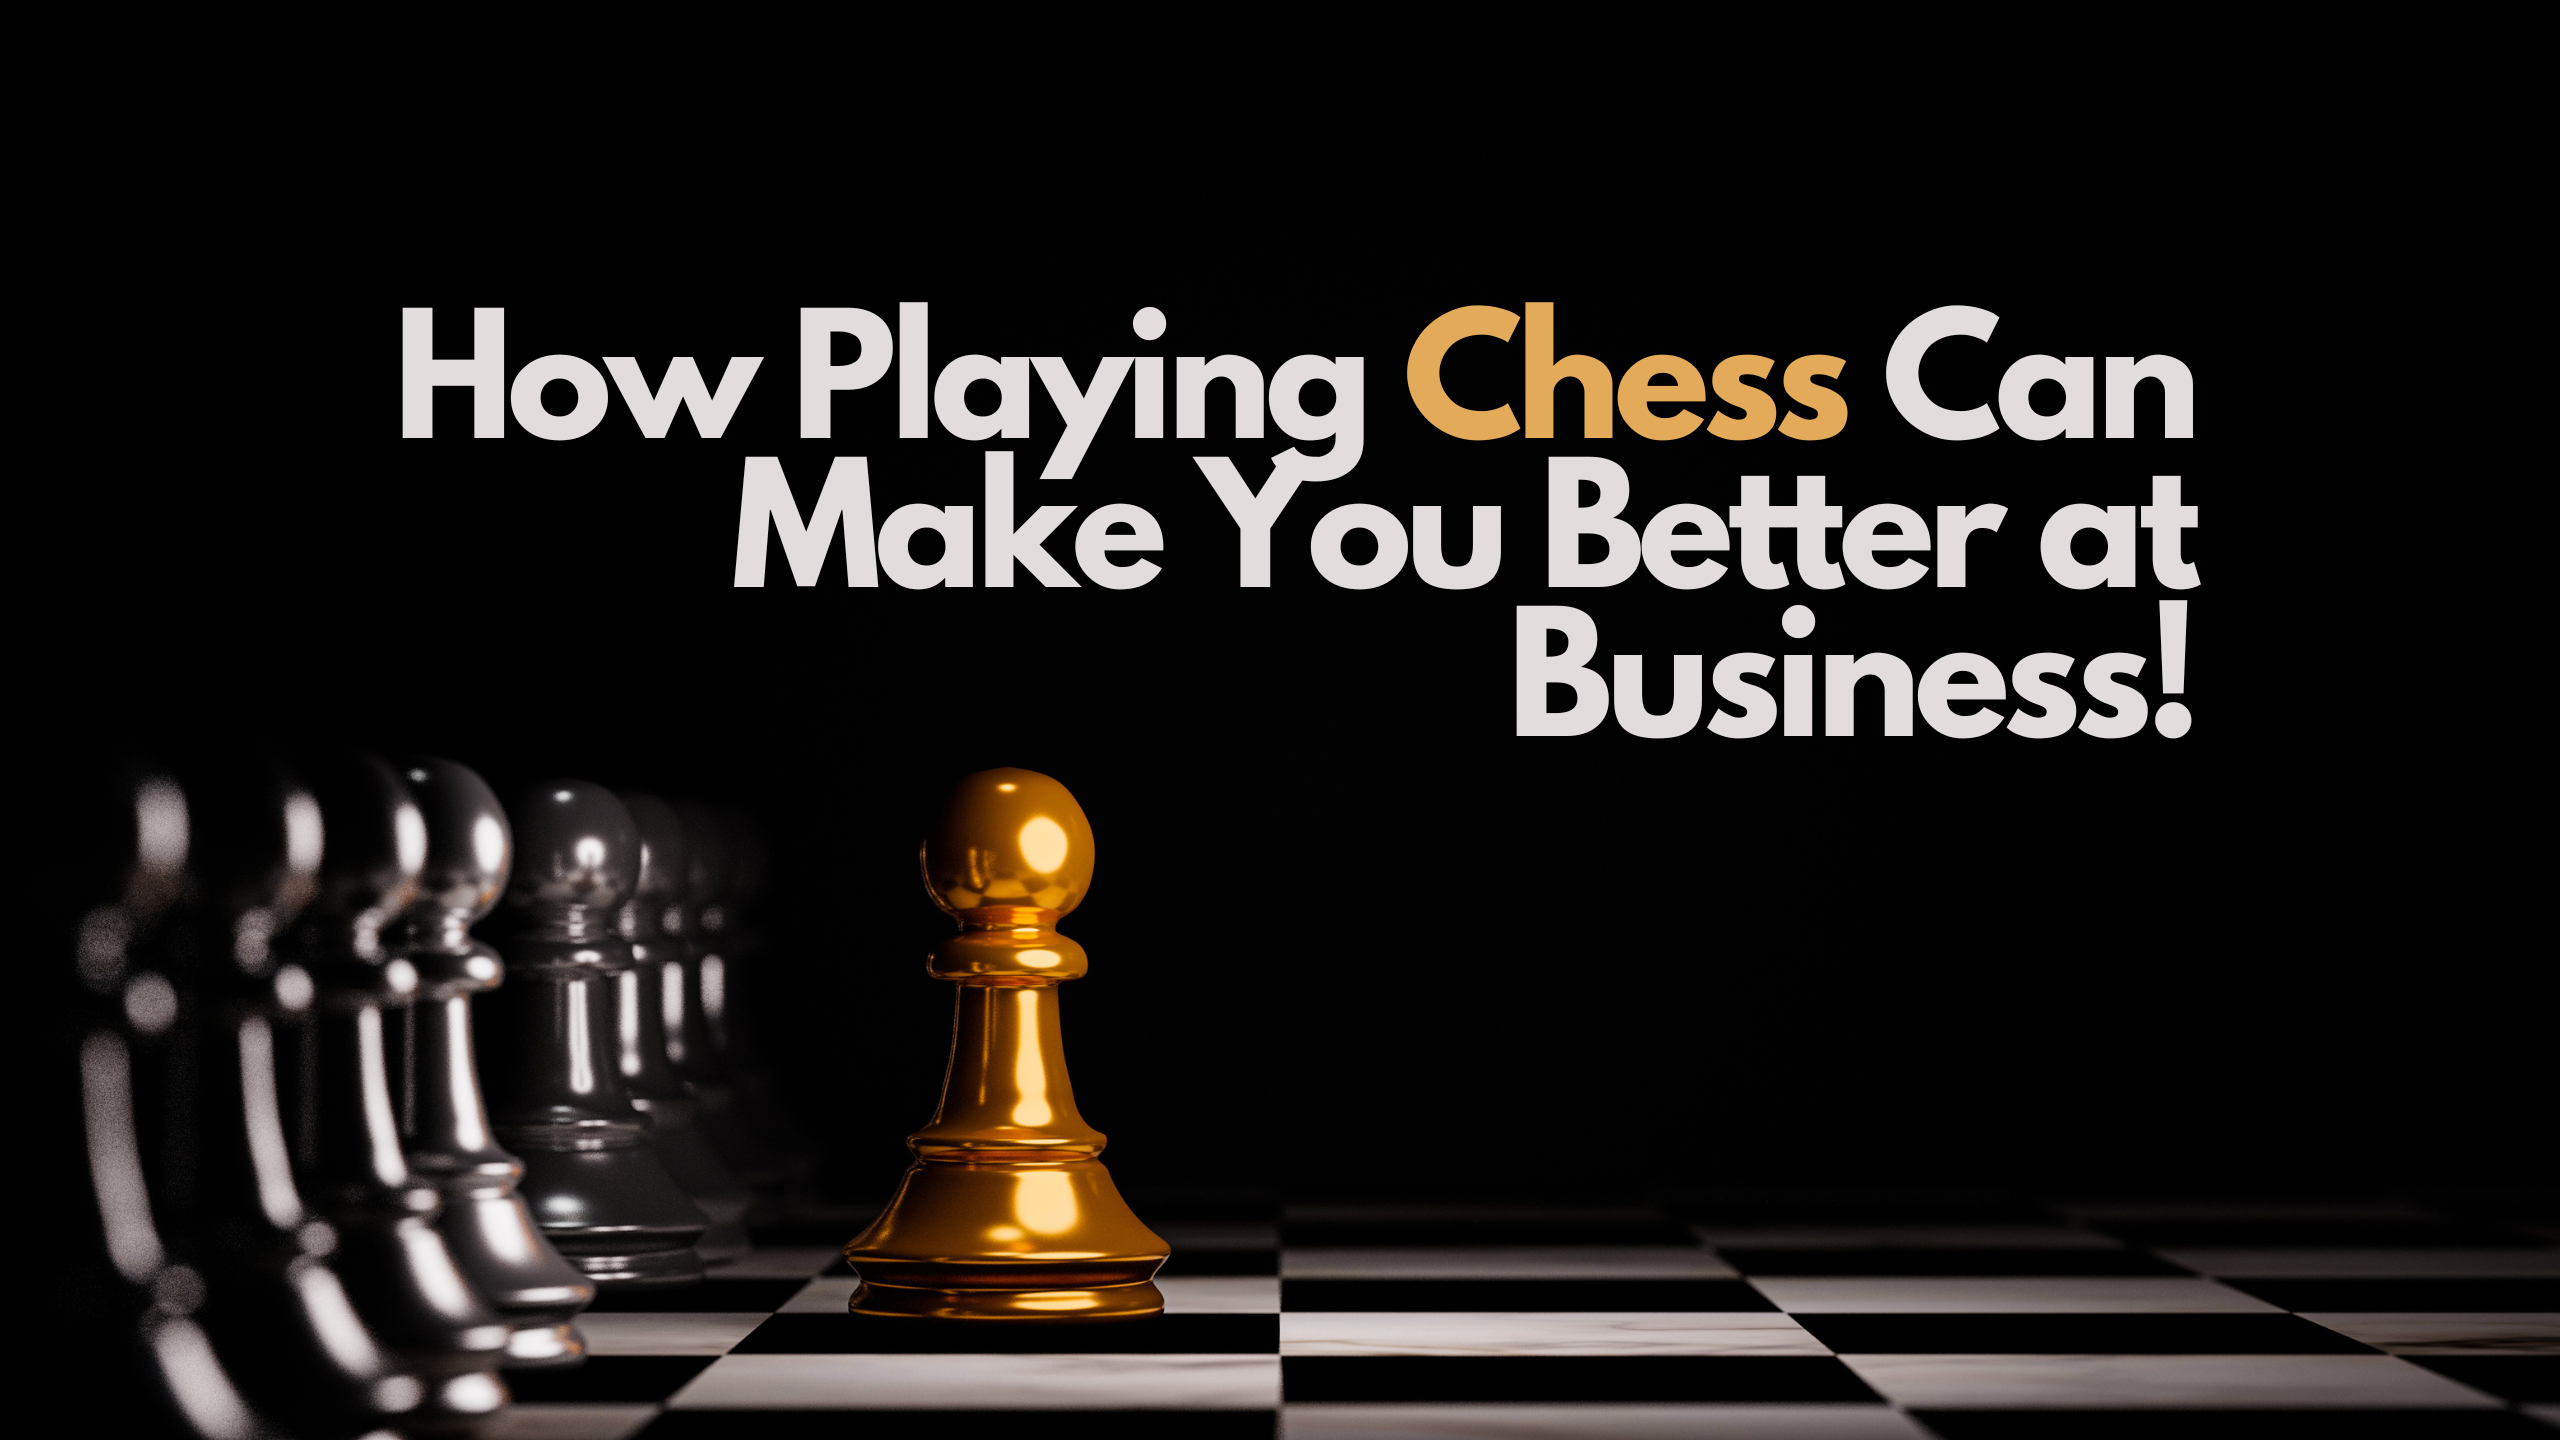 Chess making you better in business